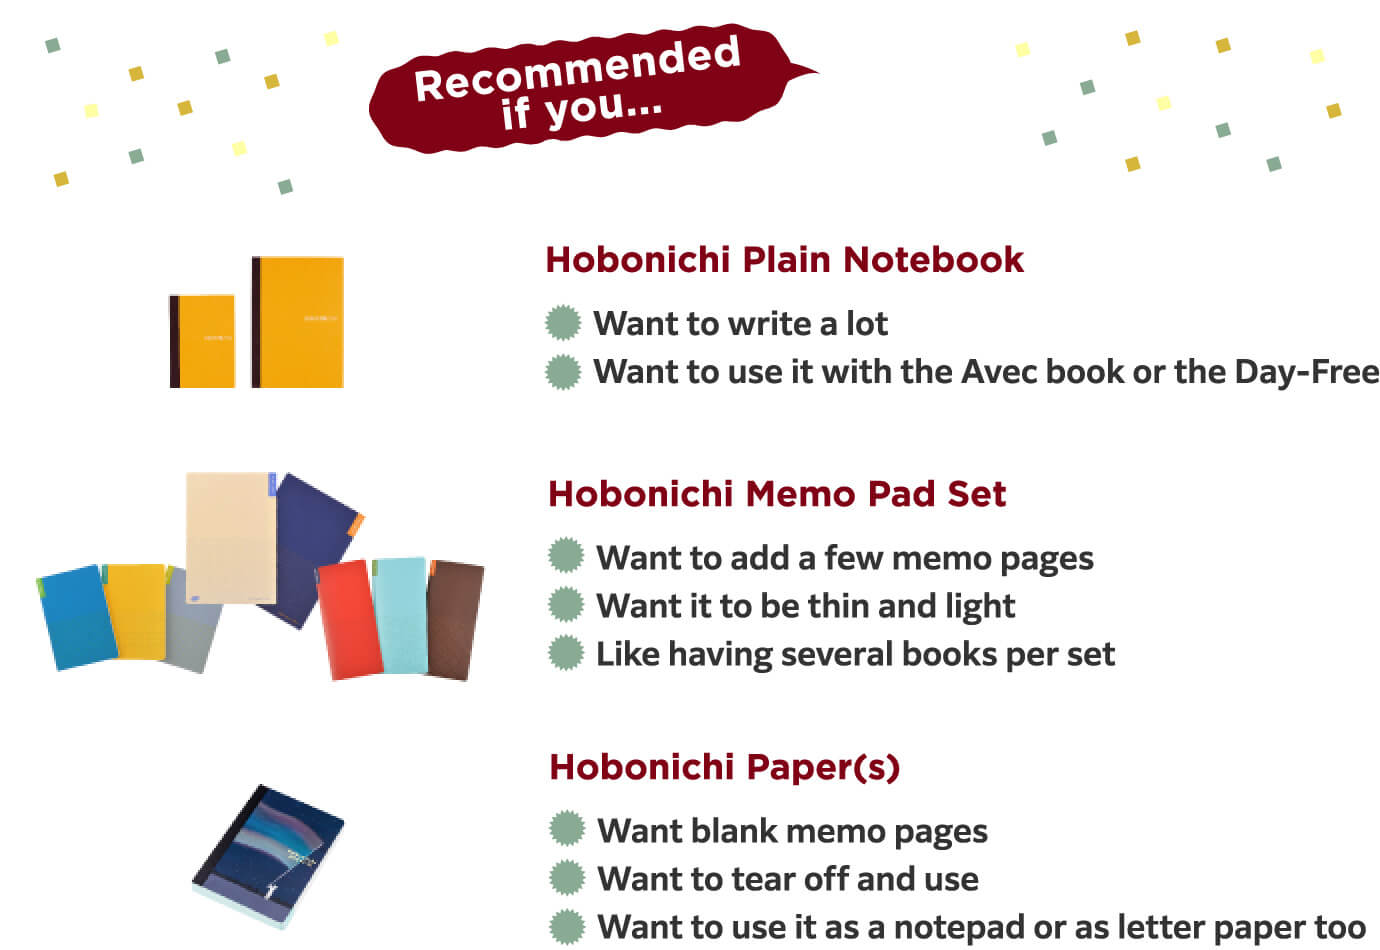 Recommended if you . . .
                    Hobonichi Plain Notebook
                    -	Want to write a lot
                    -	Want to use it with the Avec book or the Day-Free
                    
                    Hobonichi Memo Pad Set
                    -	Want to add a few memo pages
                    -	Want it to be thin and light
                    -	Like having several books per set
                    
                    Hobonichi Paper(s)
                    -	Want blank memo pages
                    -	Want to tear off and use
                    -	Want to use it as a notepad or as letter paper too